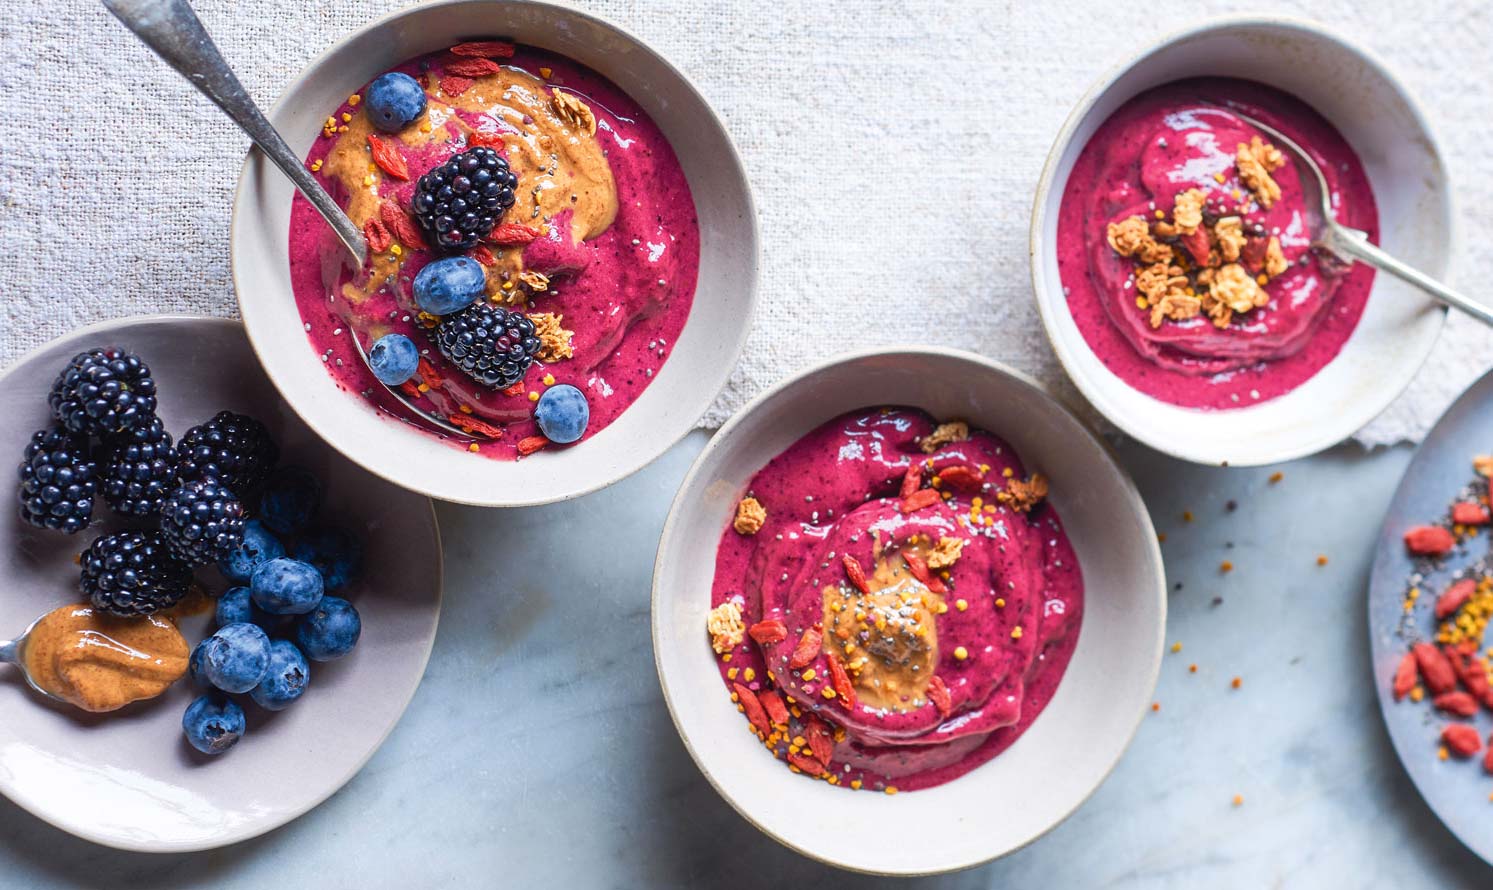 If You Have at Least 12/23 of These Foods in Your Kitchen, You’re Officially Middle-Class Acai Bowls